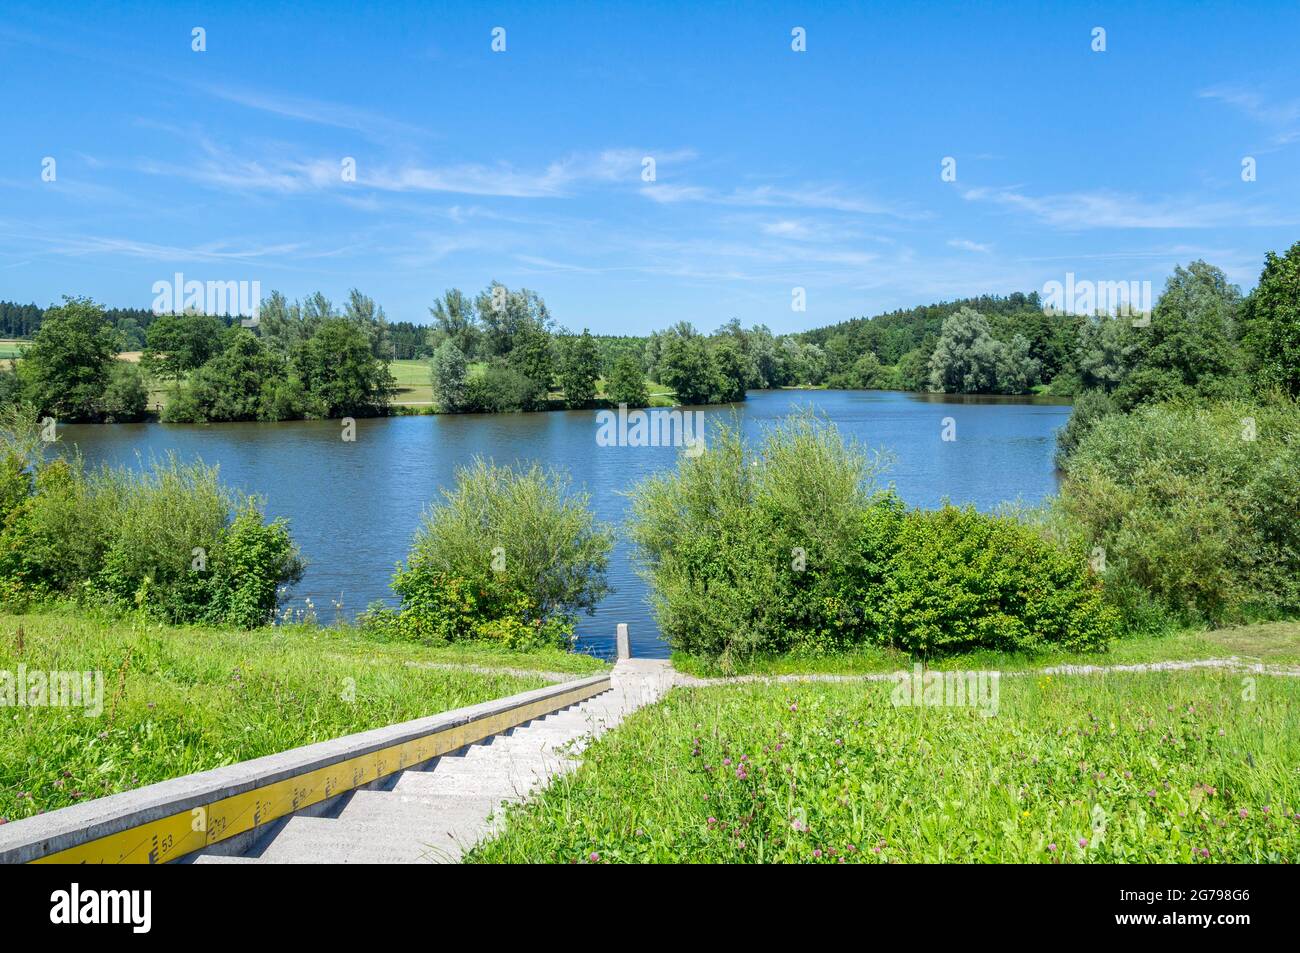 Germany, Baden-Wuerttemberg, Welzheim-Aichstrut, Aichstrut flood retention basin, Aichstruter reservoir, bathing area with sunbathing area. Excursion destination, local recreation area in the Welzheimer Forest in the Swabian-Franconian Forest Nature Park. Stock Photo